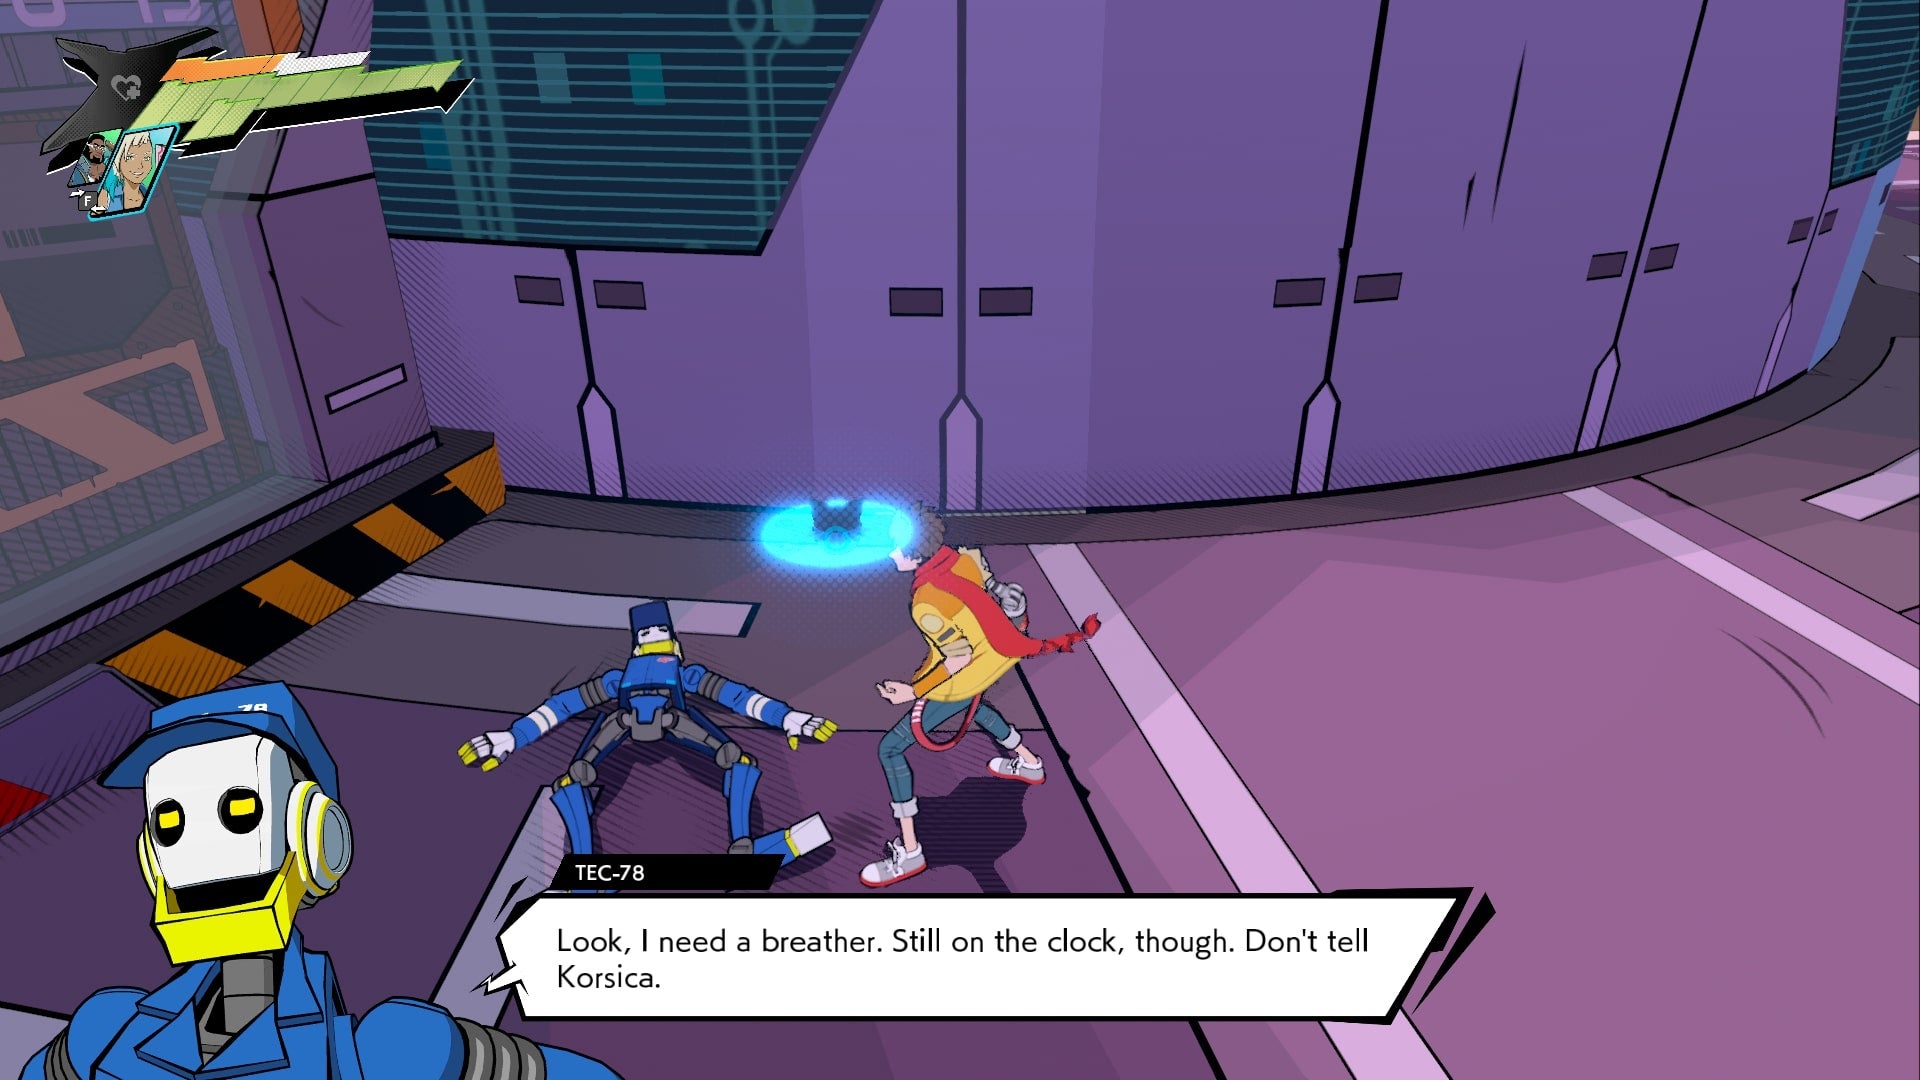 A Hi-Fi Rush screenshot of Chai standing over a security robot lying on the floor